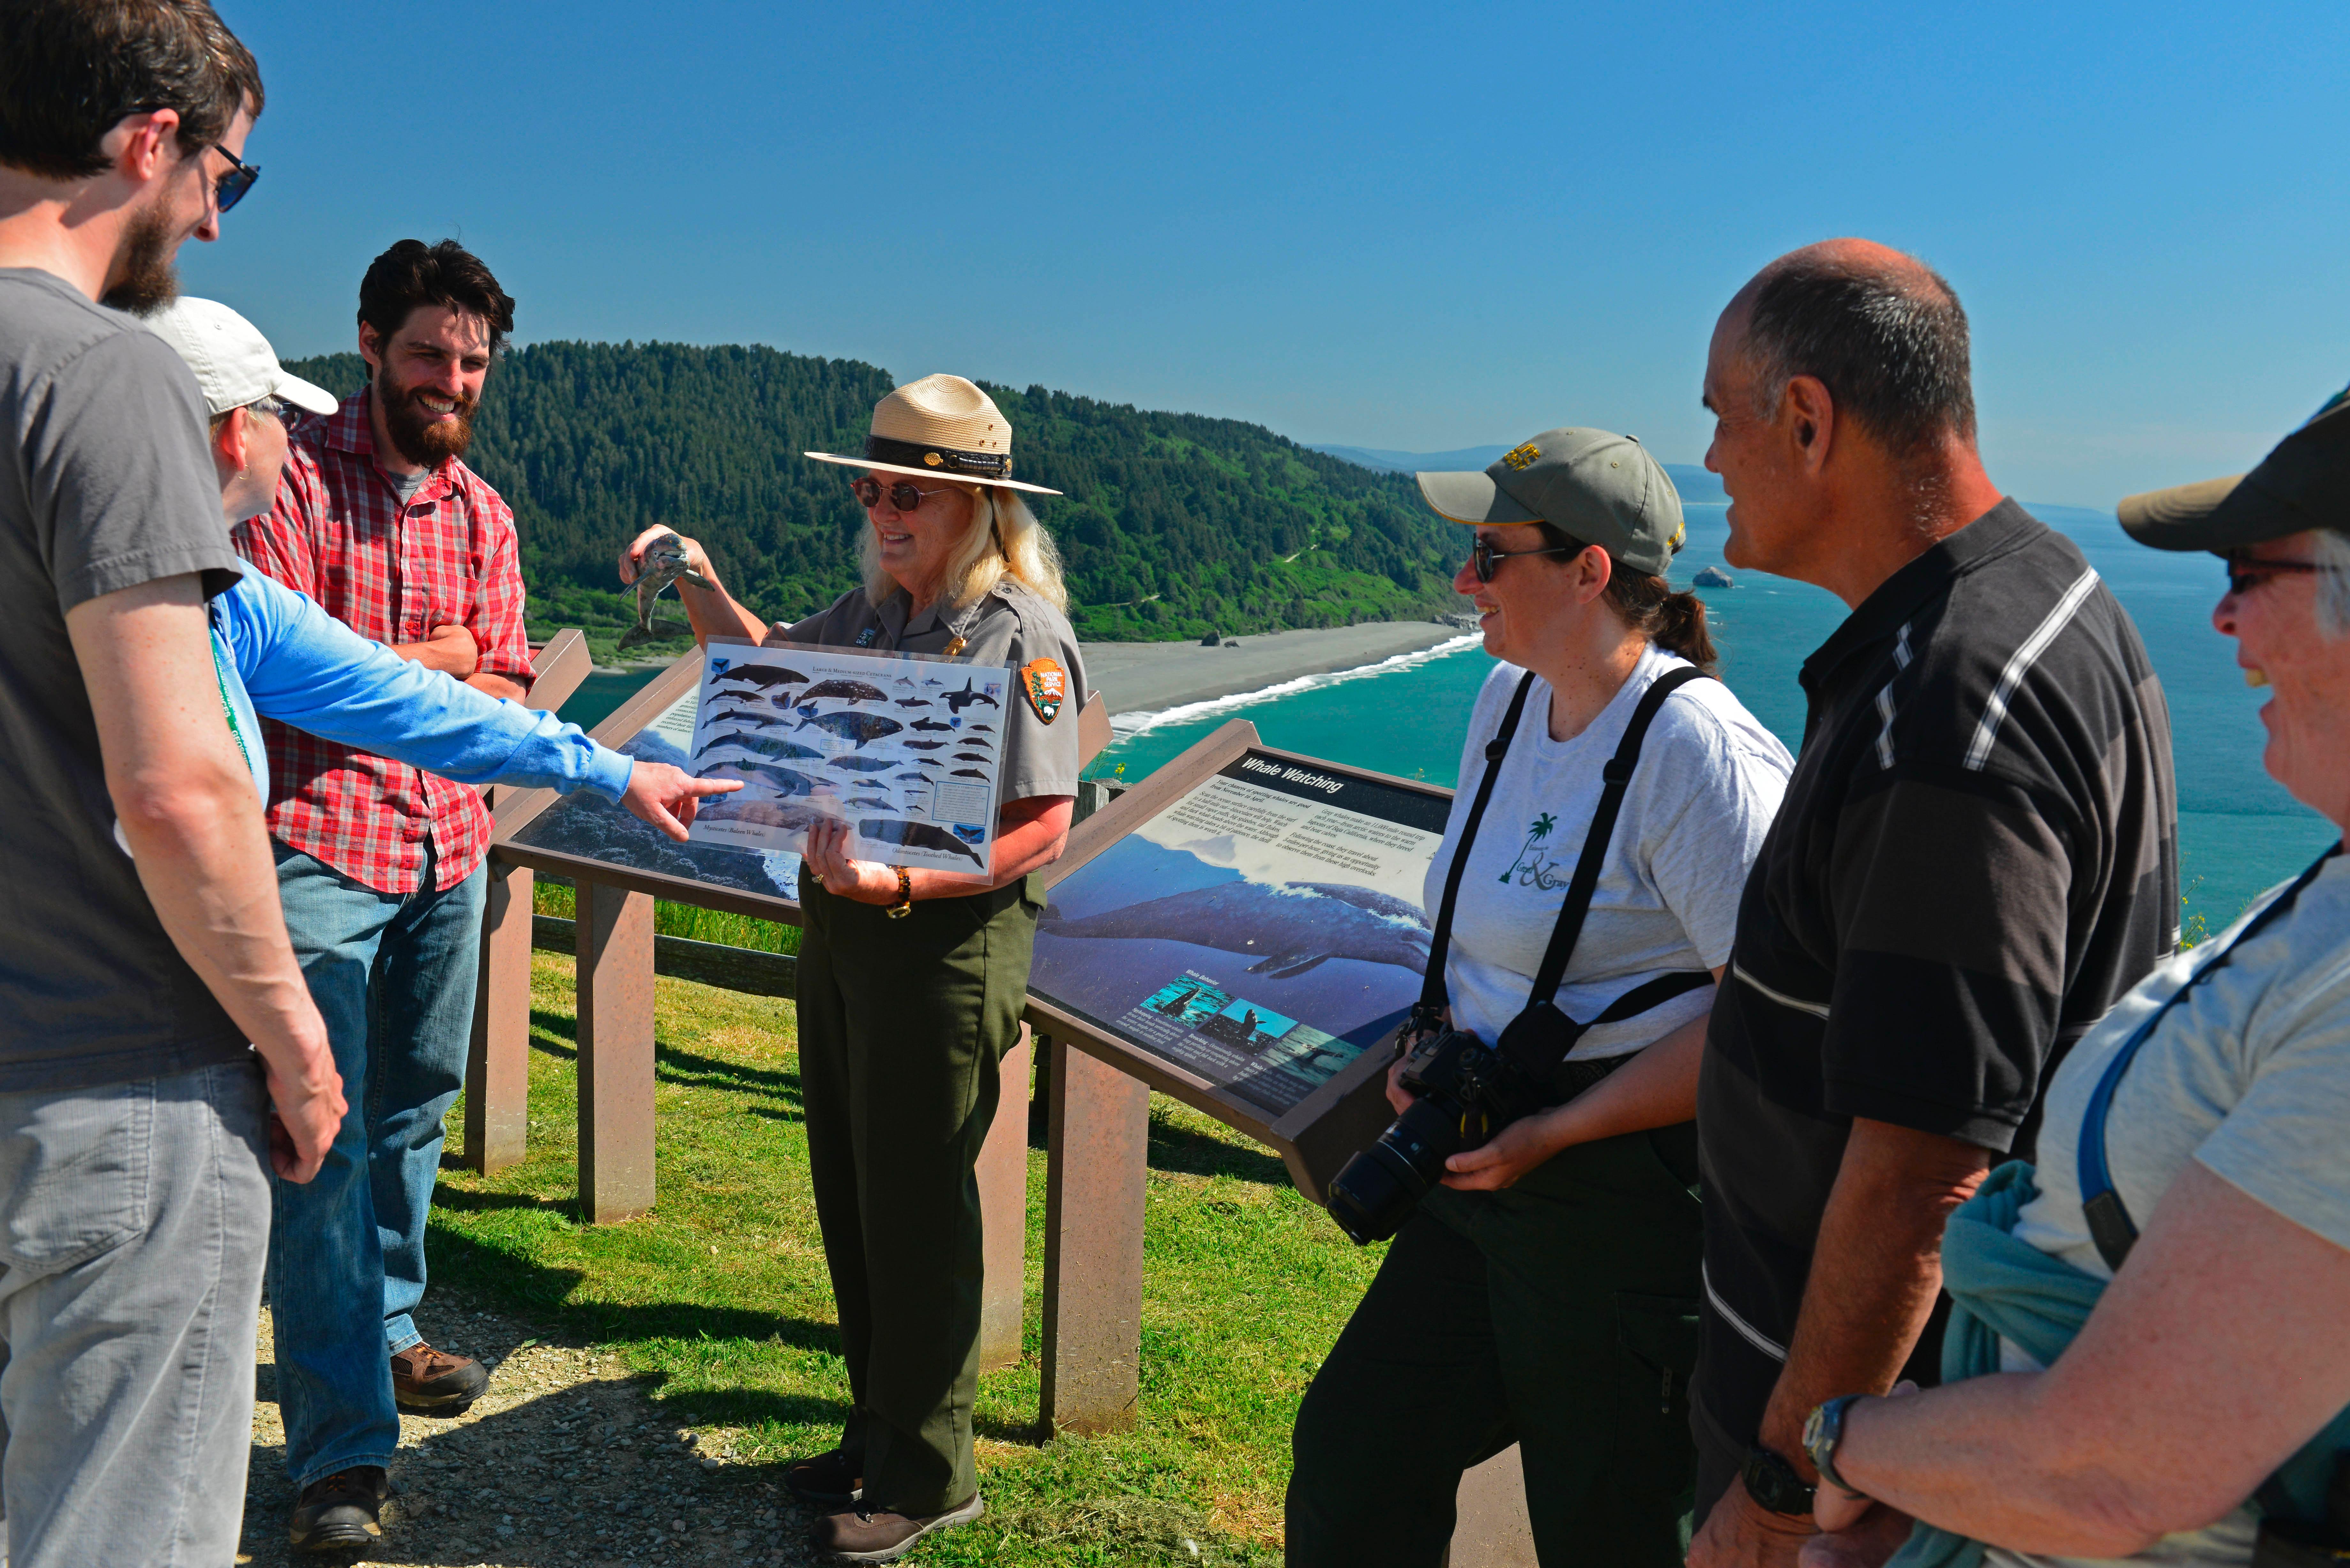 Visitors chatting with a ranger above a river mouth.